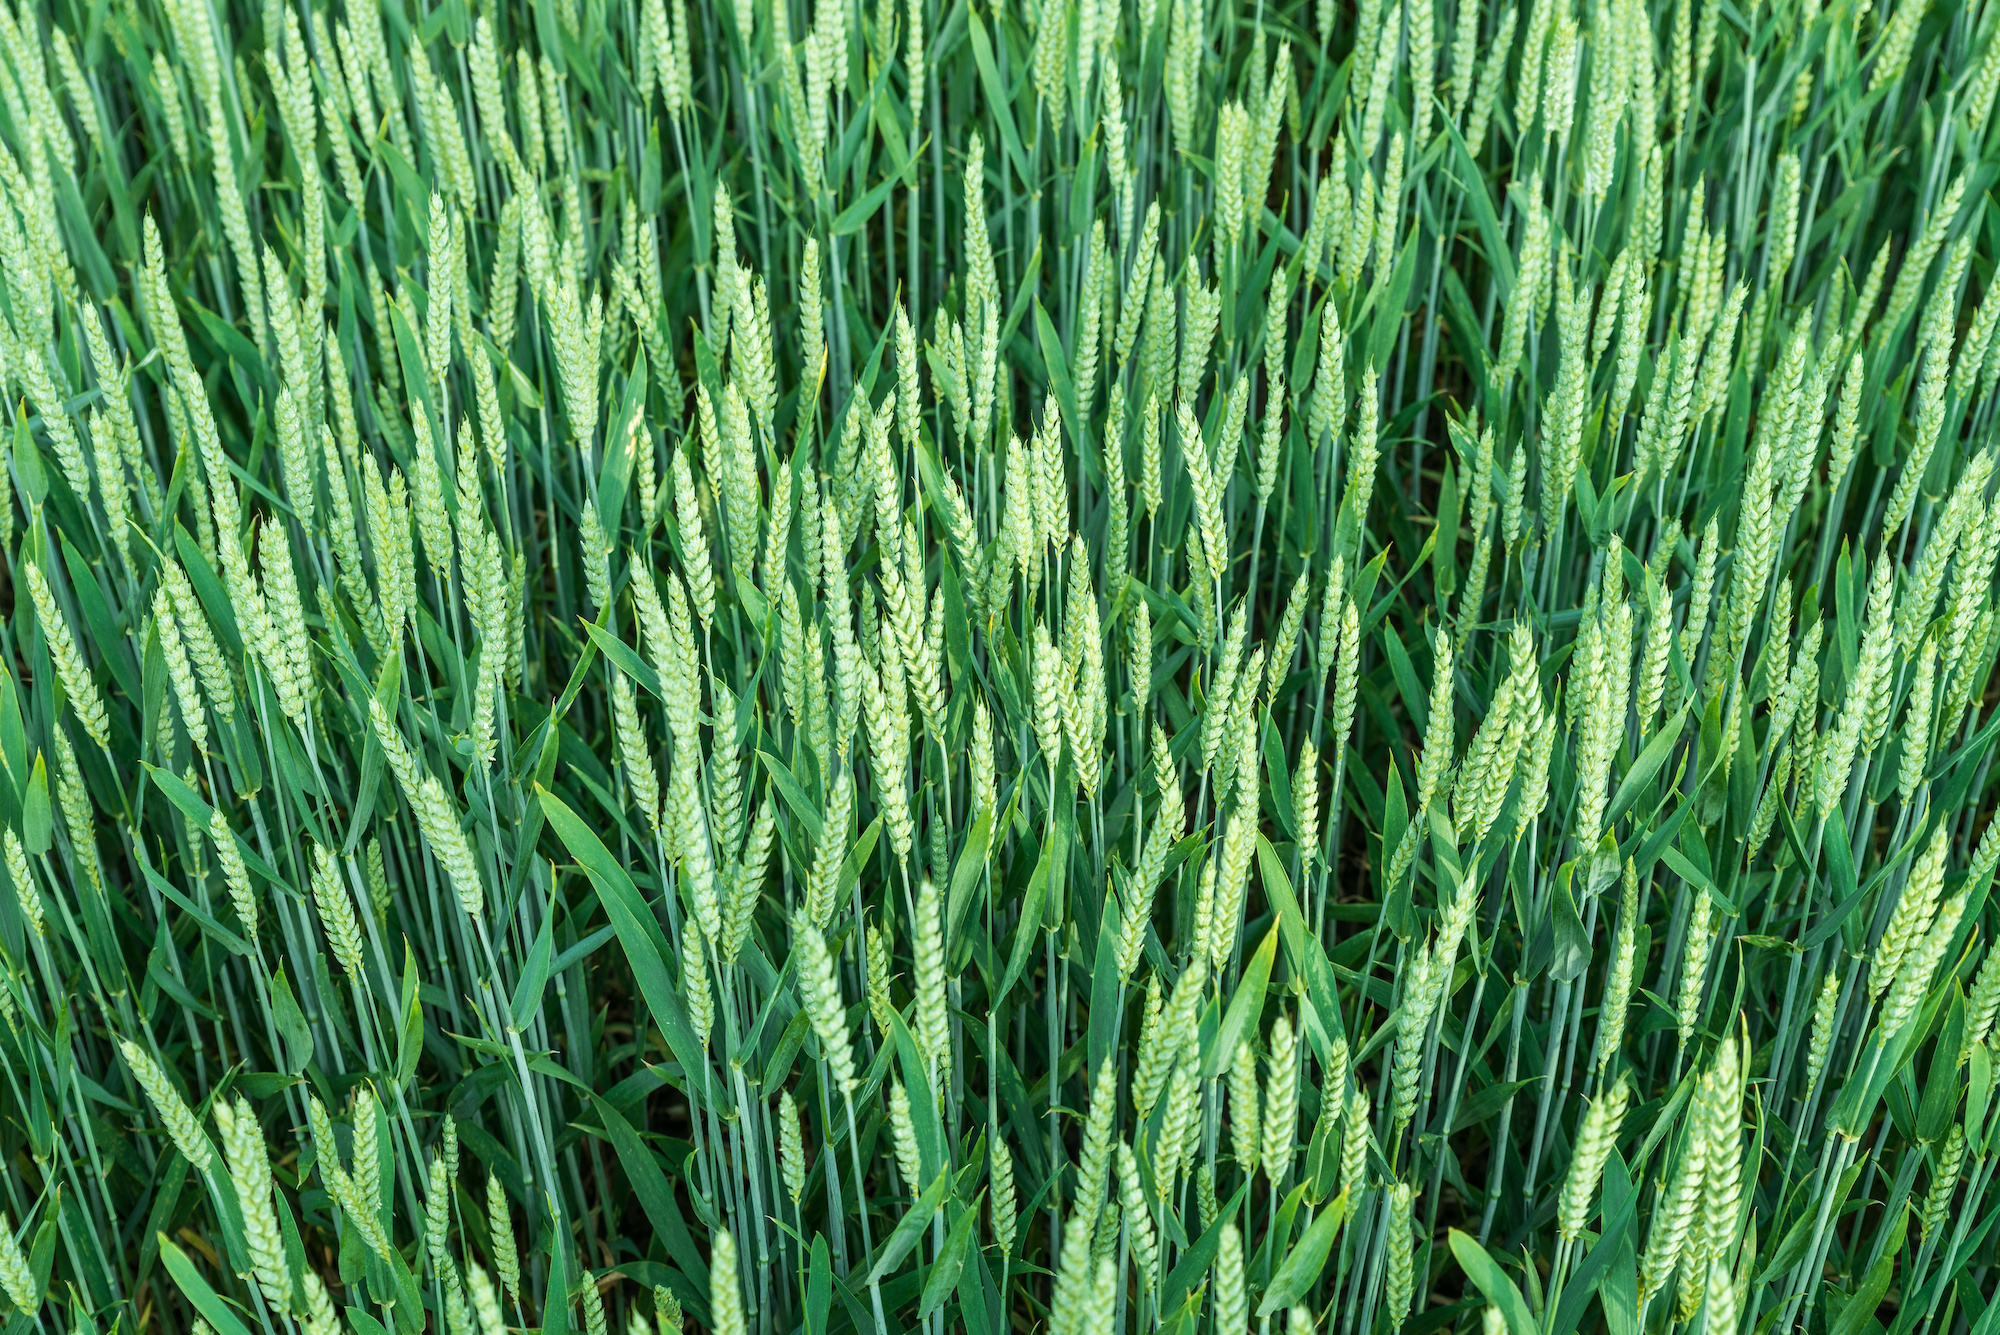 The complex genetics of wheat have so far prevented the breeding of resistant varieties. (Image: Adobe Stock)